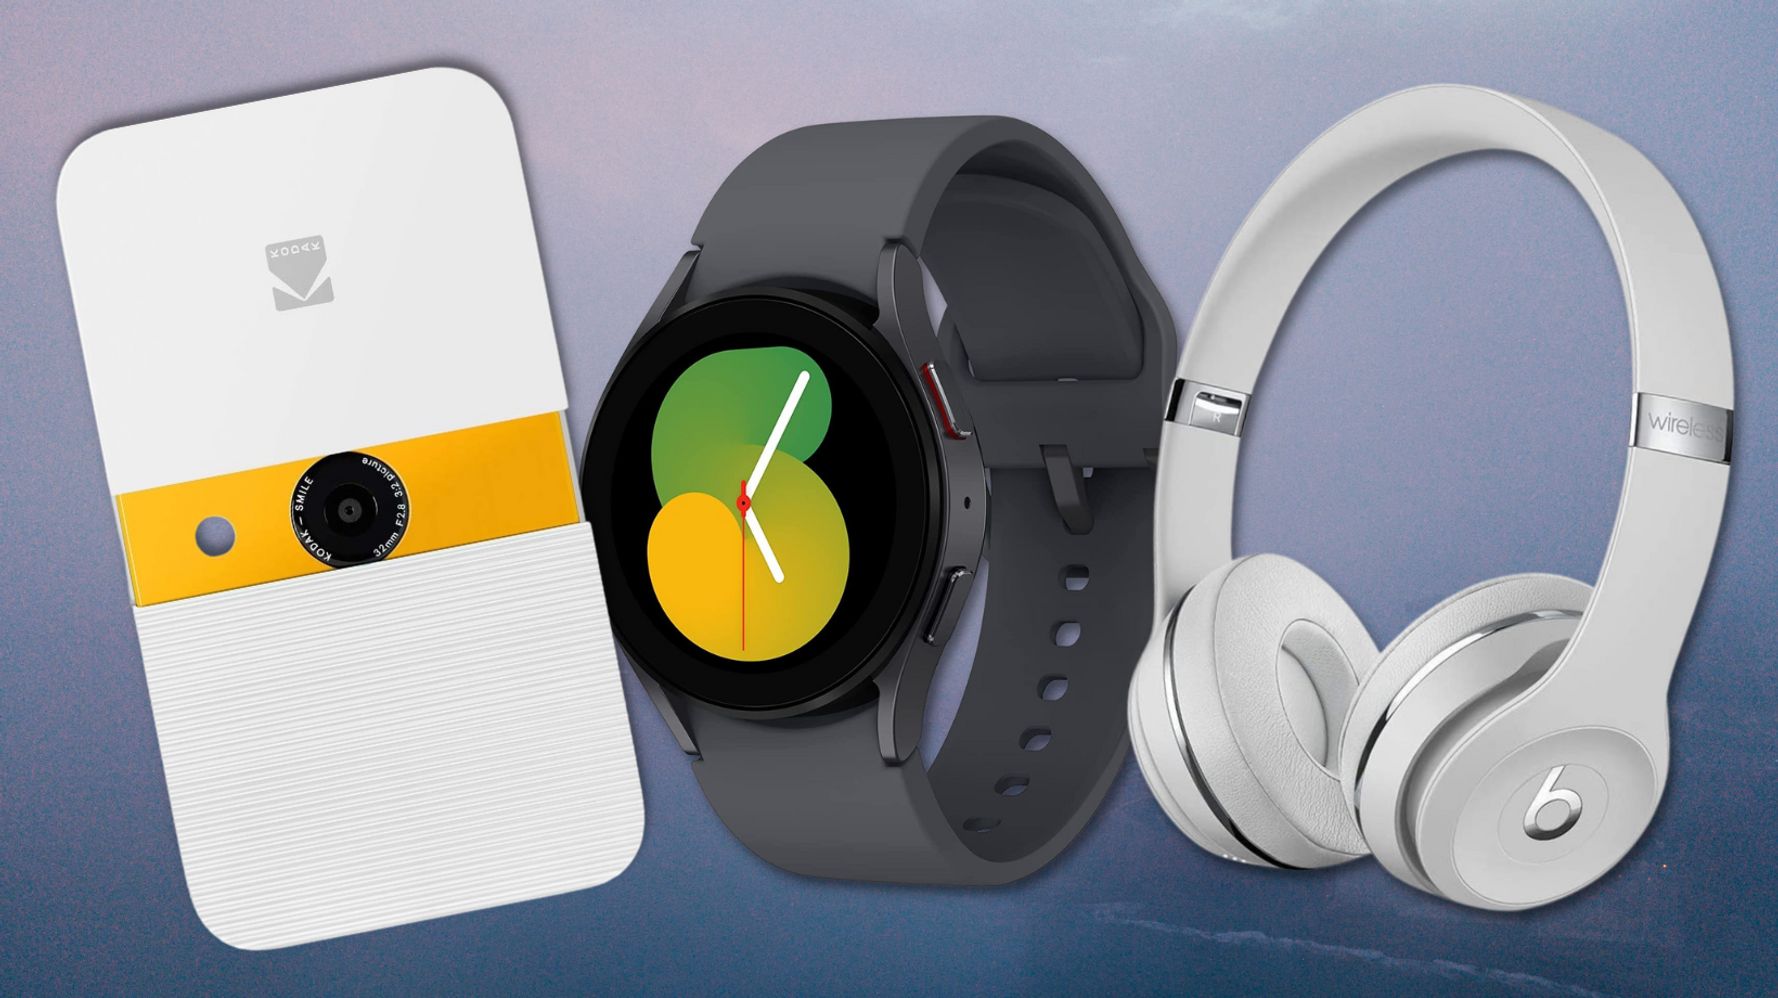 Mother's Day gadget gift guide 2022: tech gifts she'll love » Gadget Flow